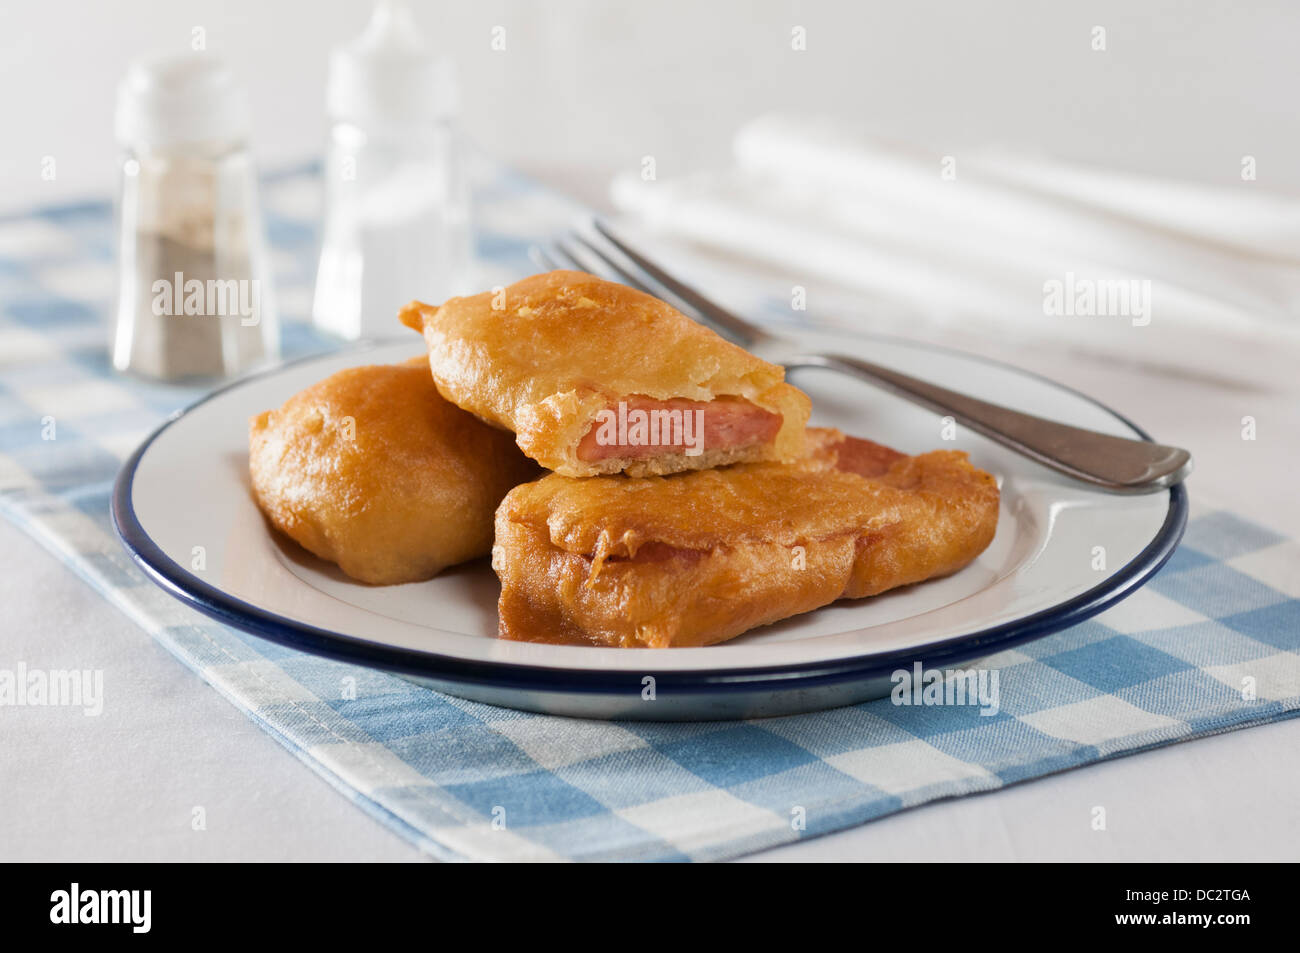 Spam fritters. Processed pork meat deep fried in batter. Stock Photo